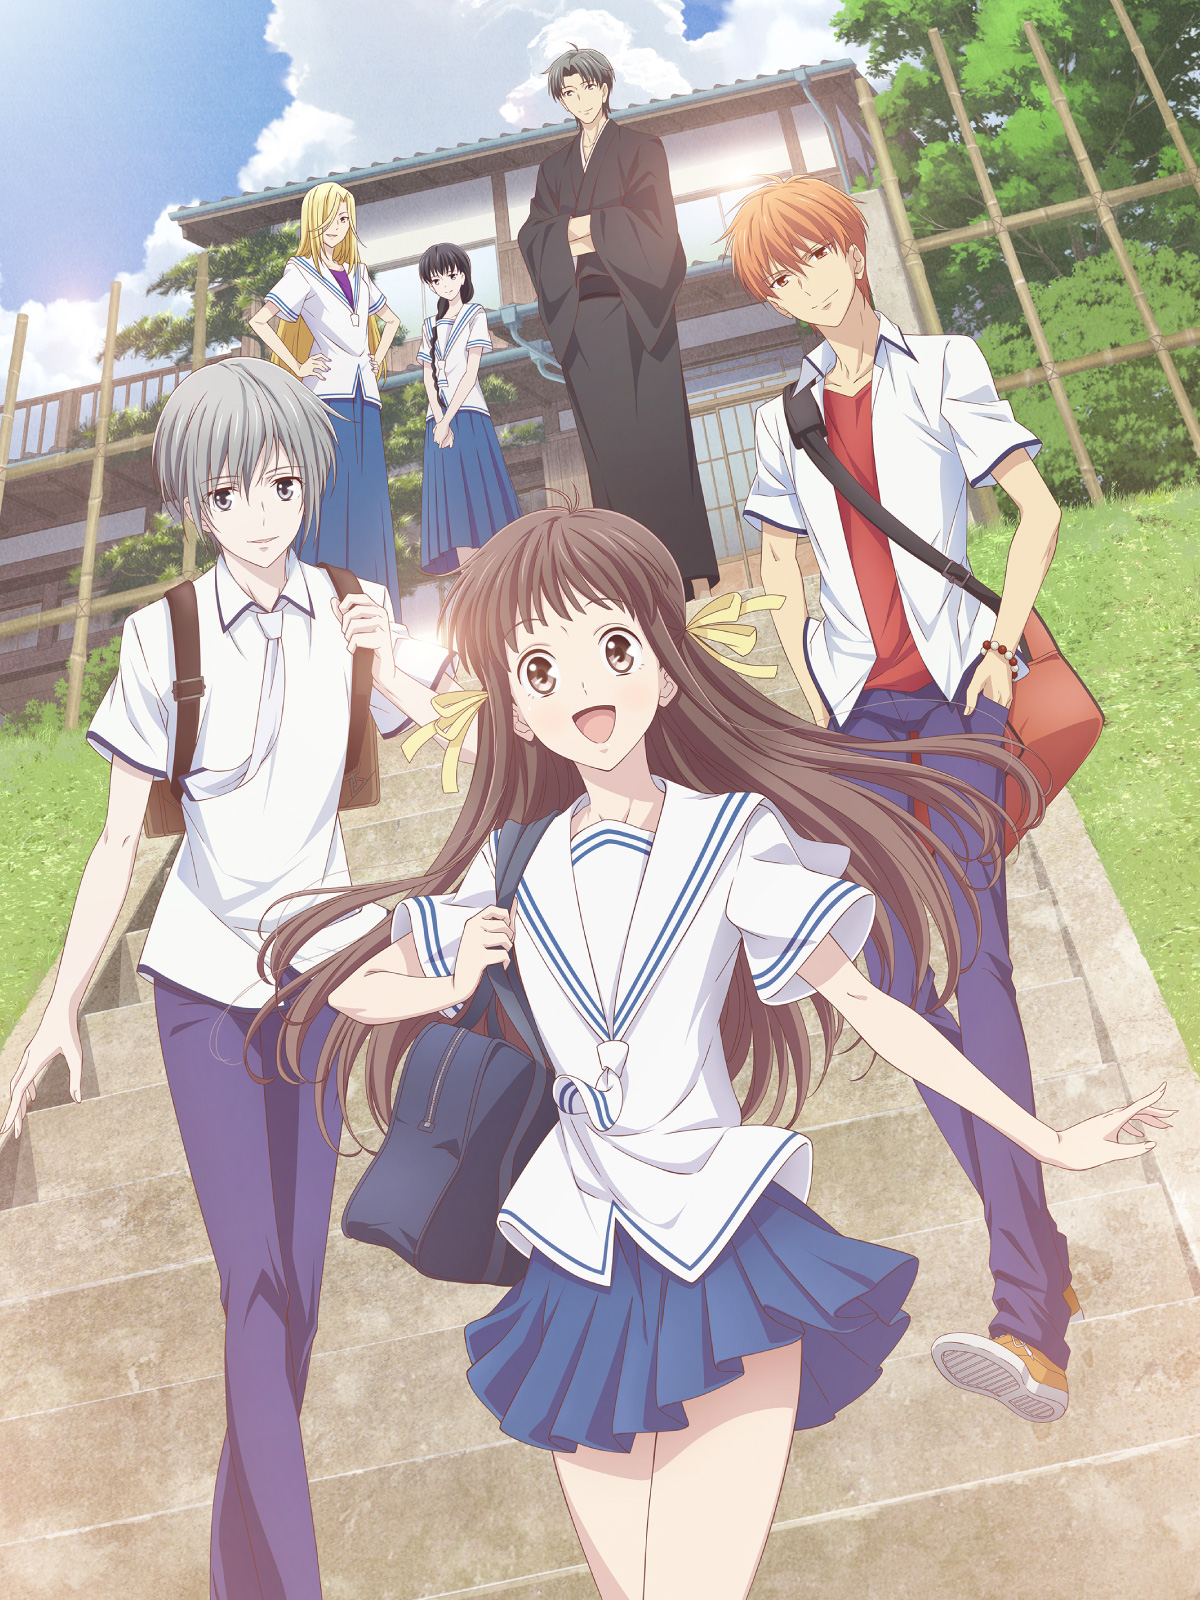 Fruits Basket Anime Returns with Another New Promo and Visual